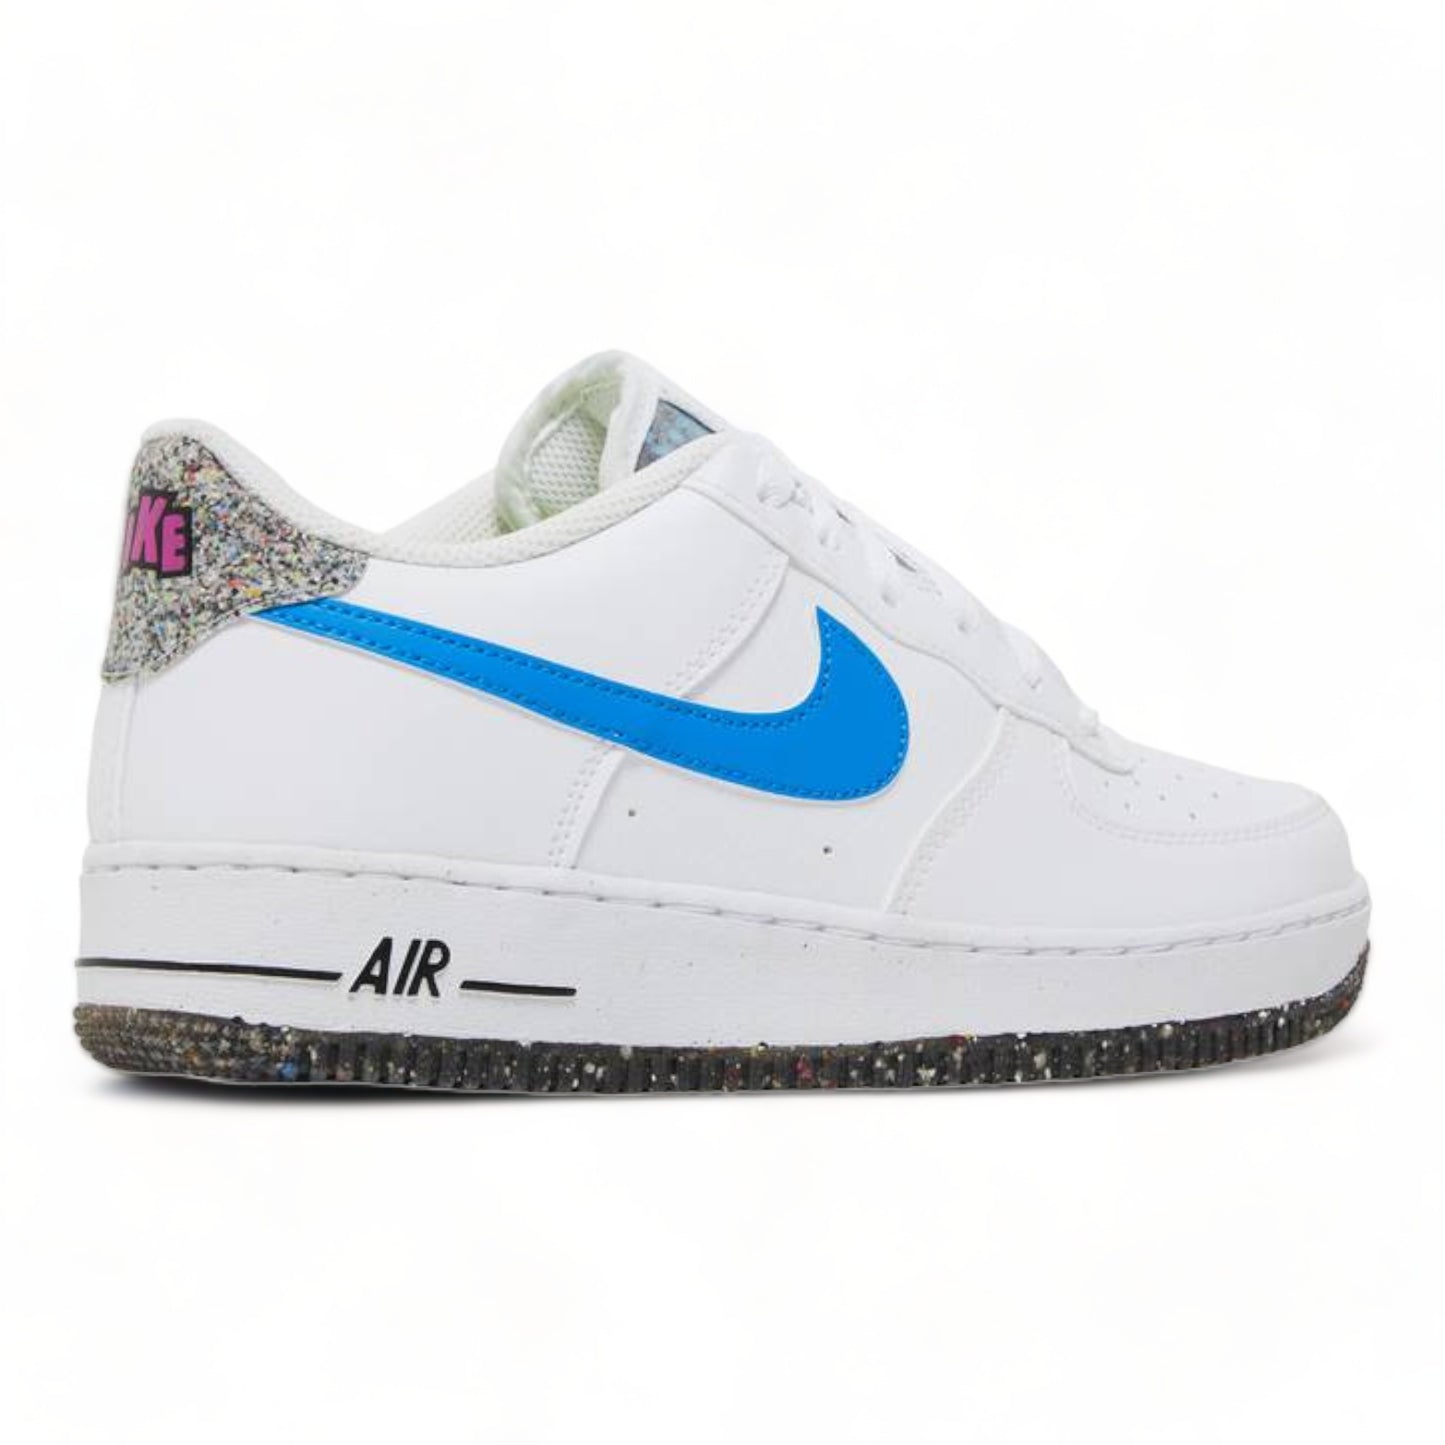 NIKE AIR FORCE 1 LV8 NEXT NATURE CRATER GS 'WHITE LIGHT PHOTO BLUE'